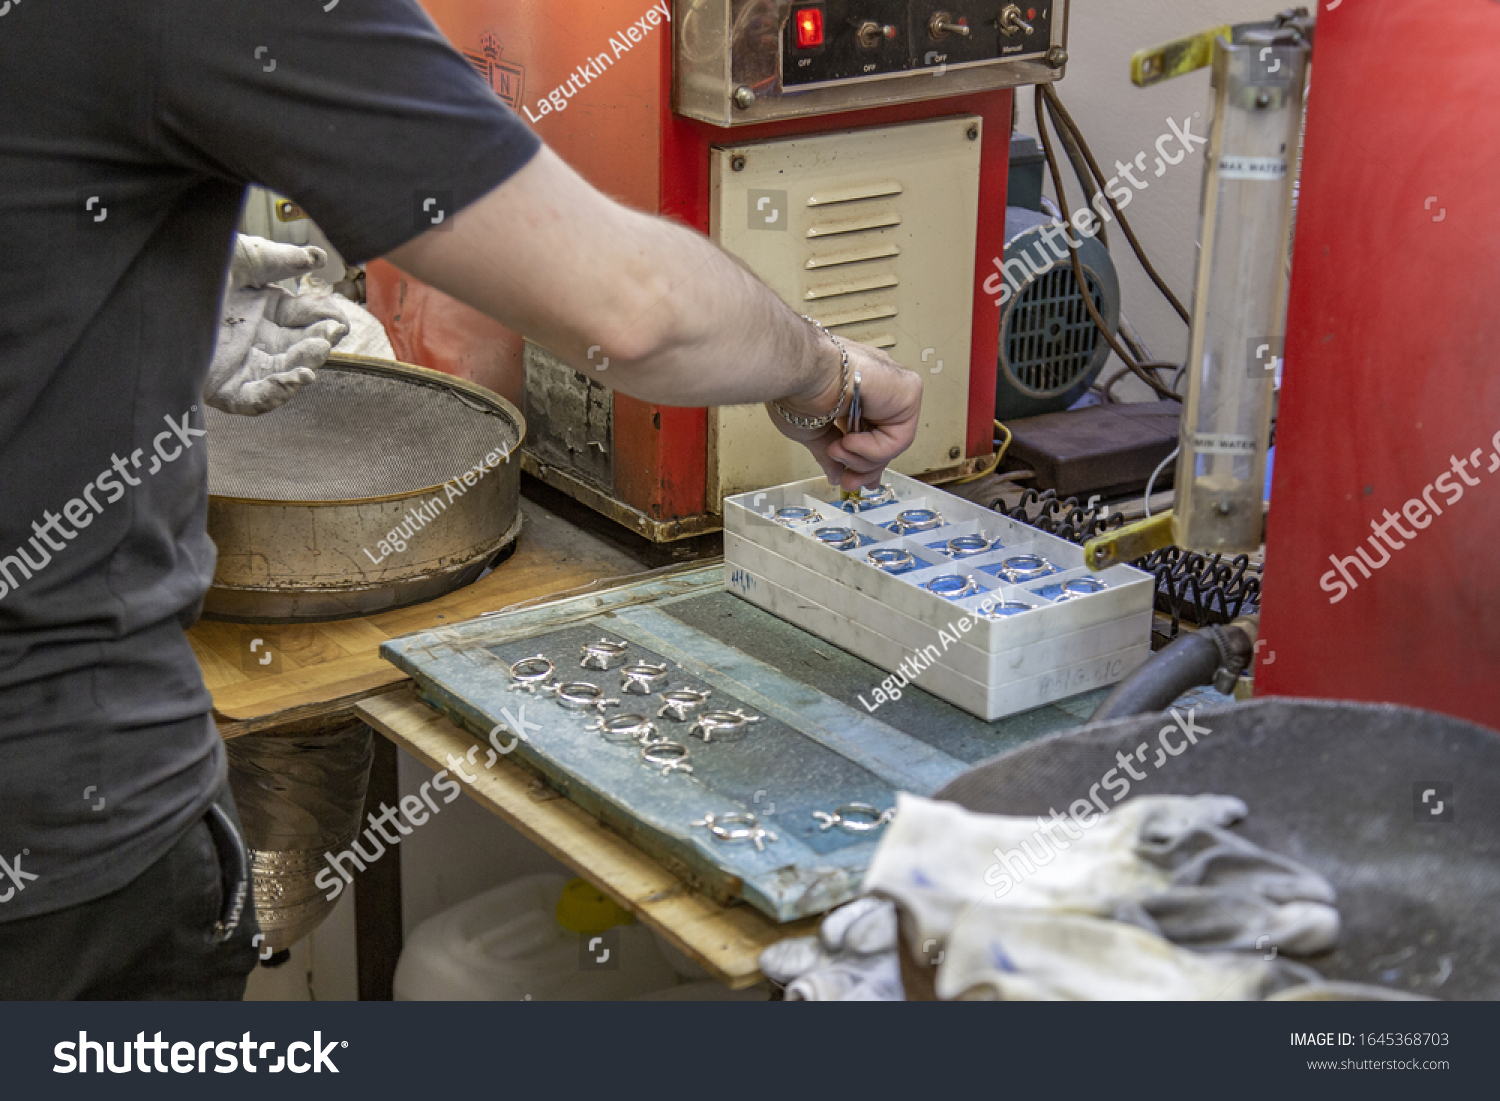 stock-photo-moscow-russia-february-industrial-workshop-of-the-watch-factory-nika-manufacture-of-1645368703.jpg